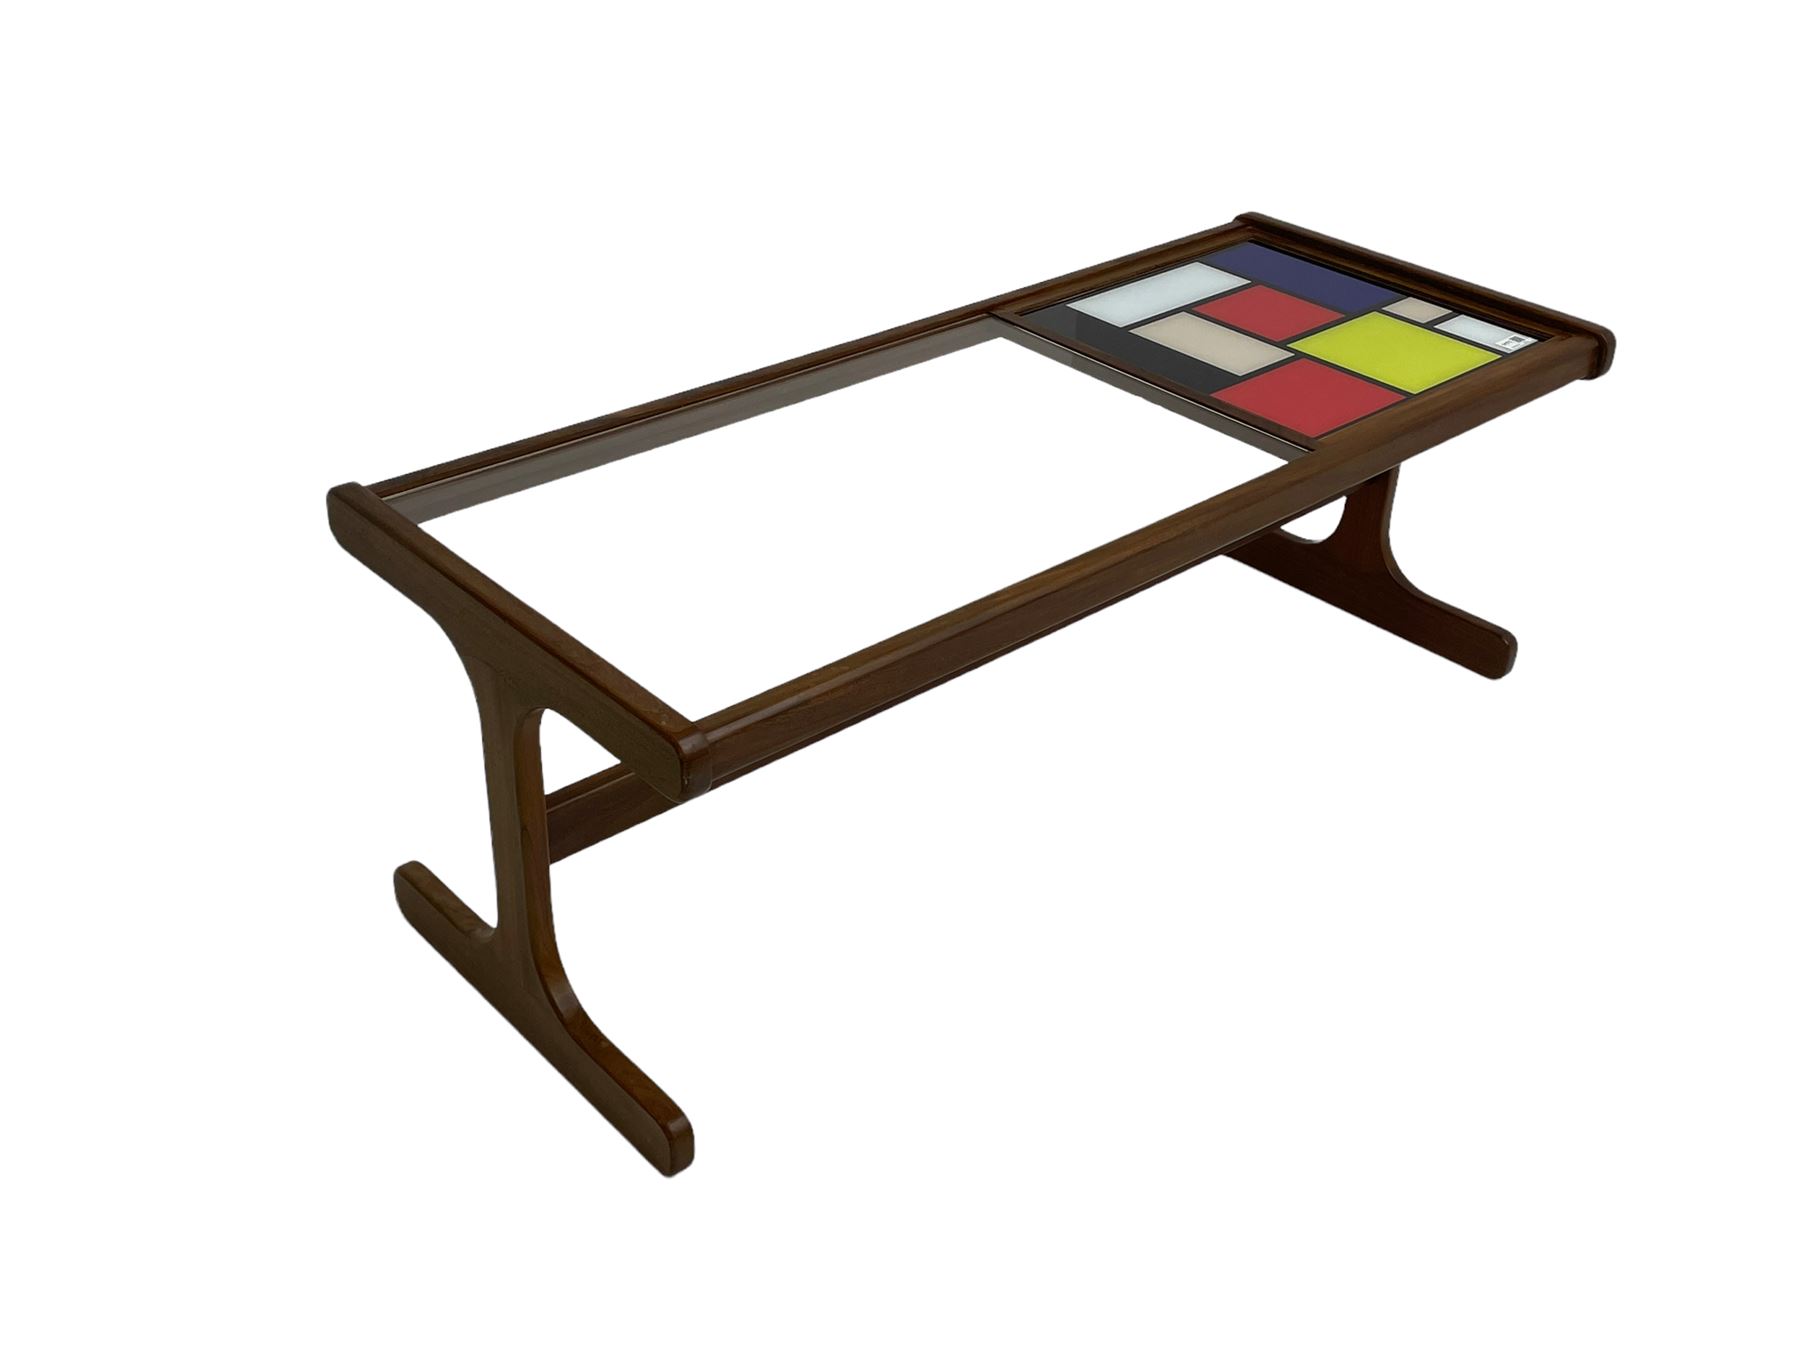 G-Plan - rectangular teak coffee table with Mondrian style inset and glass top - Image 3 of 6